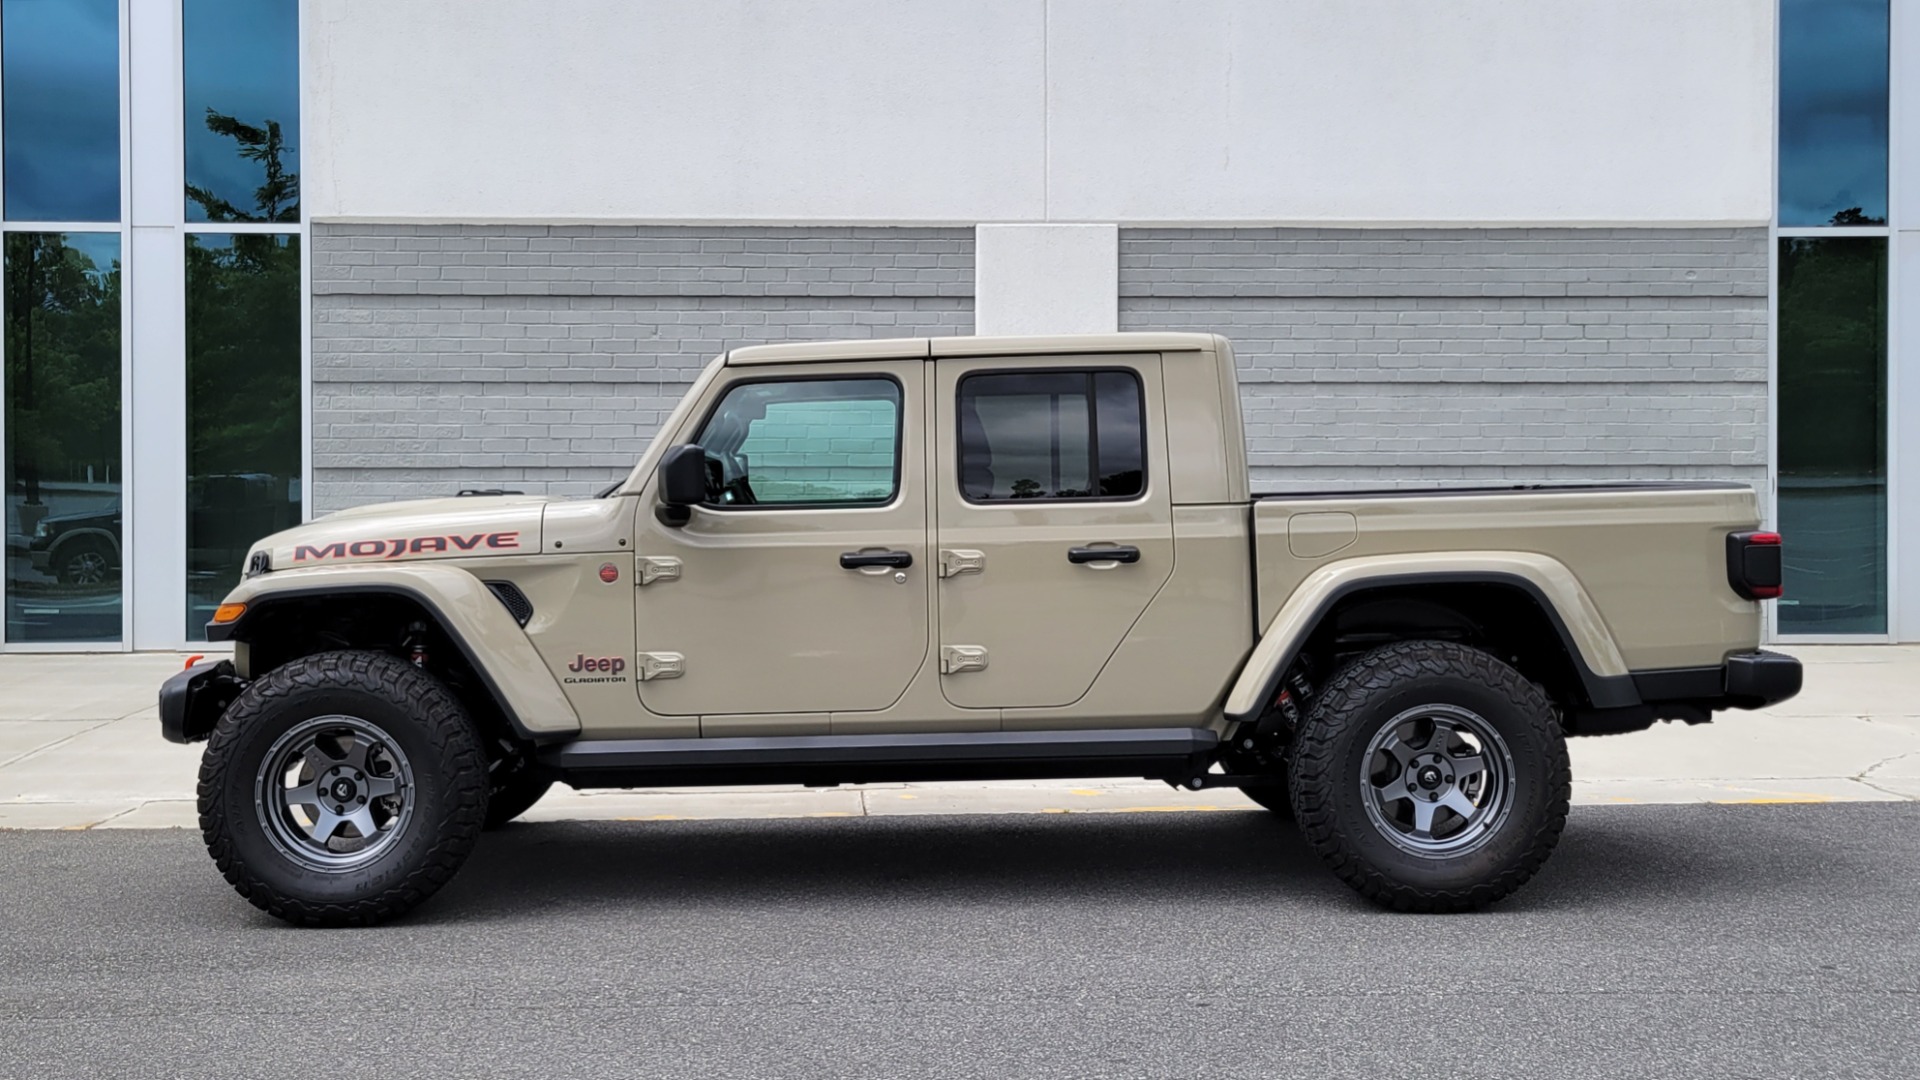 Used 2020 Jeep GLADIATOR MOJAVE 4X4 / 3.6L / AUTO / NAV / COLOR HARD-TOP / ALPINE / REARVIEW for sale $58,995 at Formula Imports in Charlotte NC 28227 6